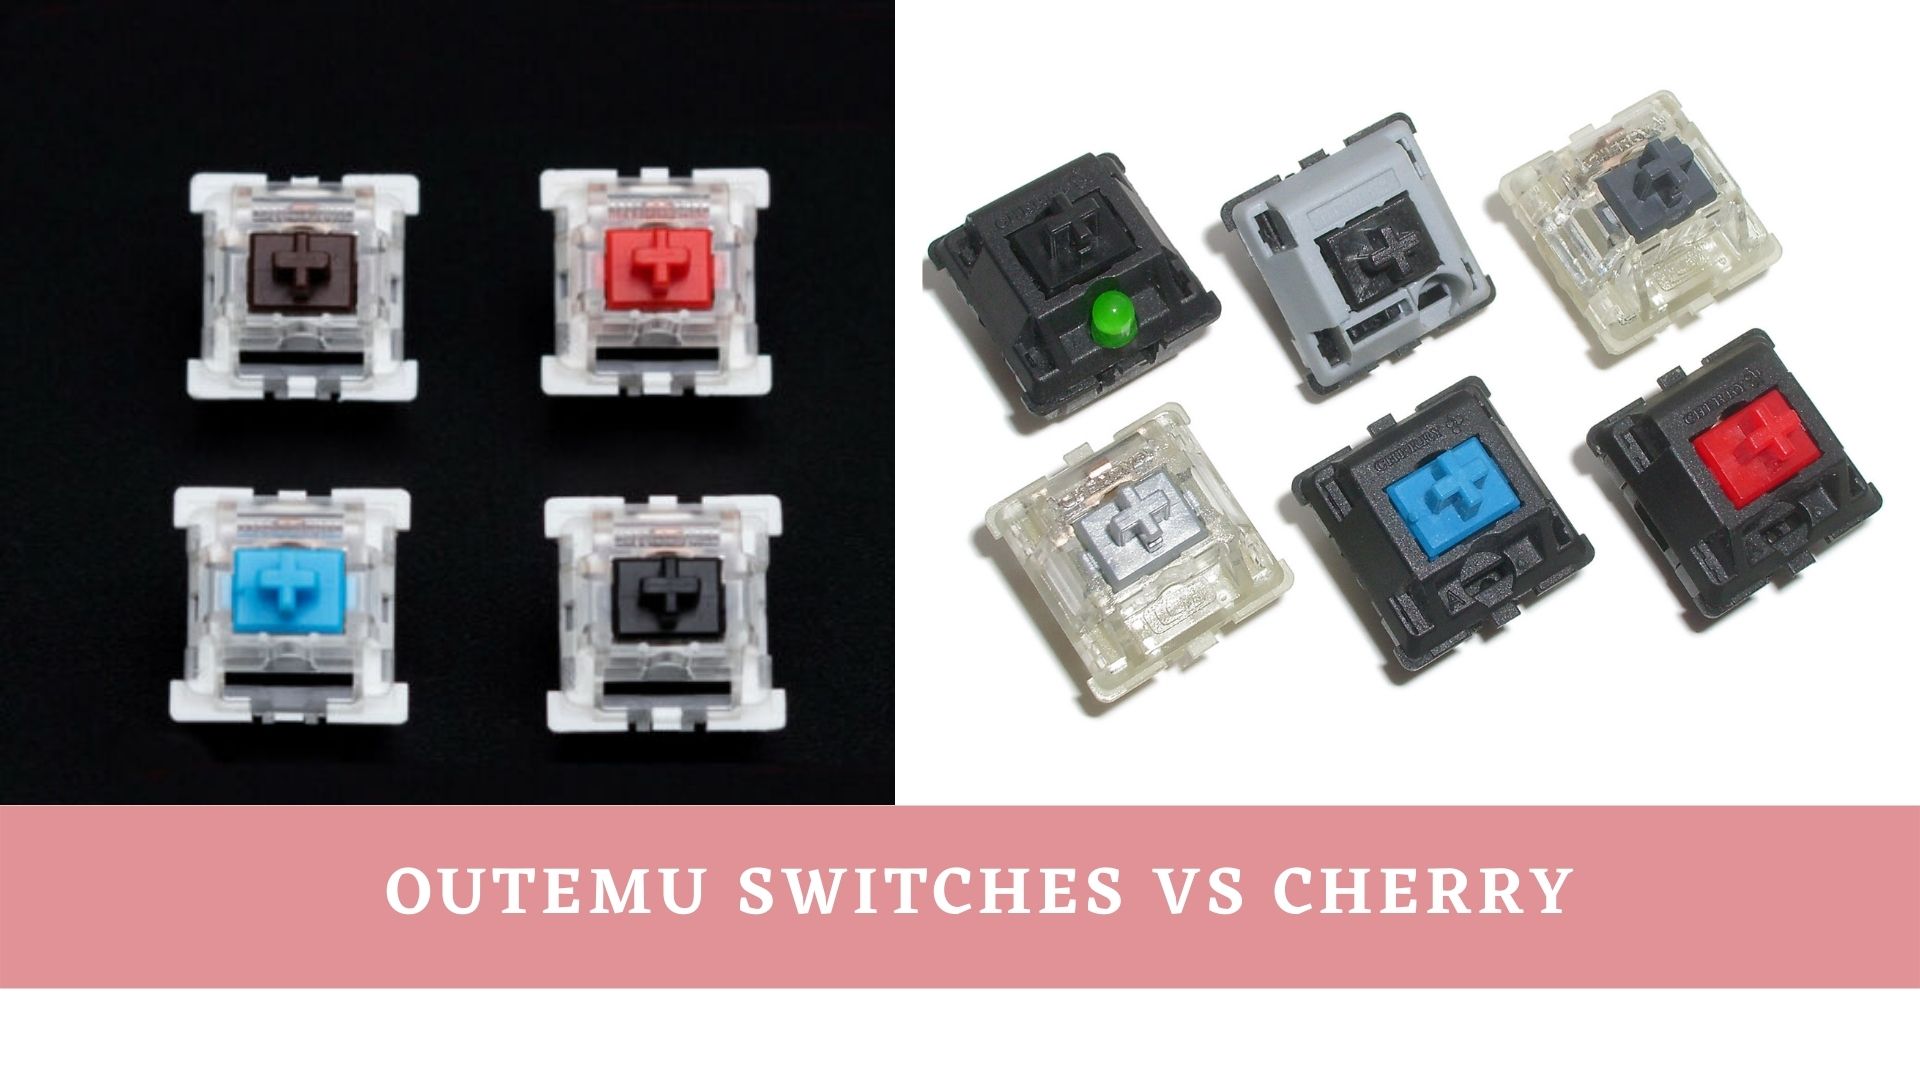 Outemu Switches vs Cherry